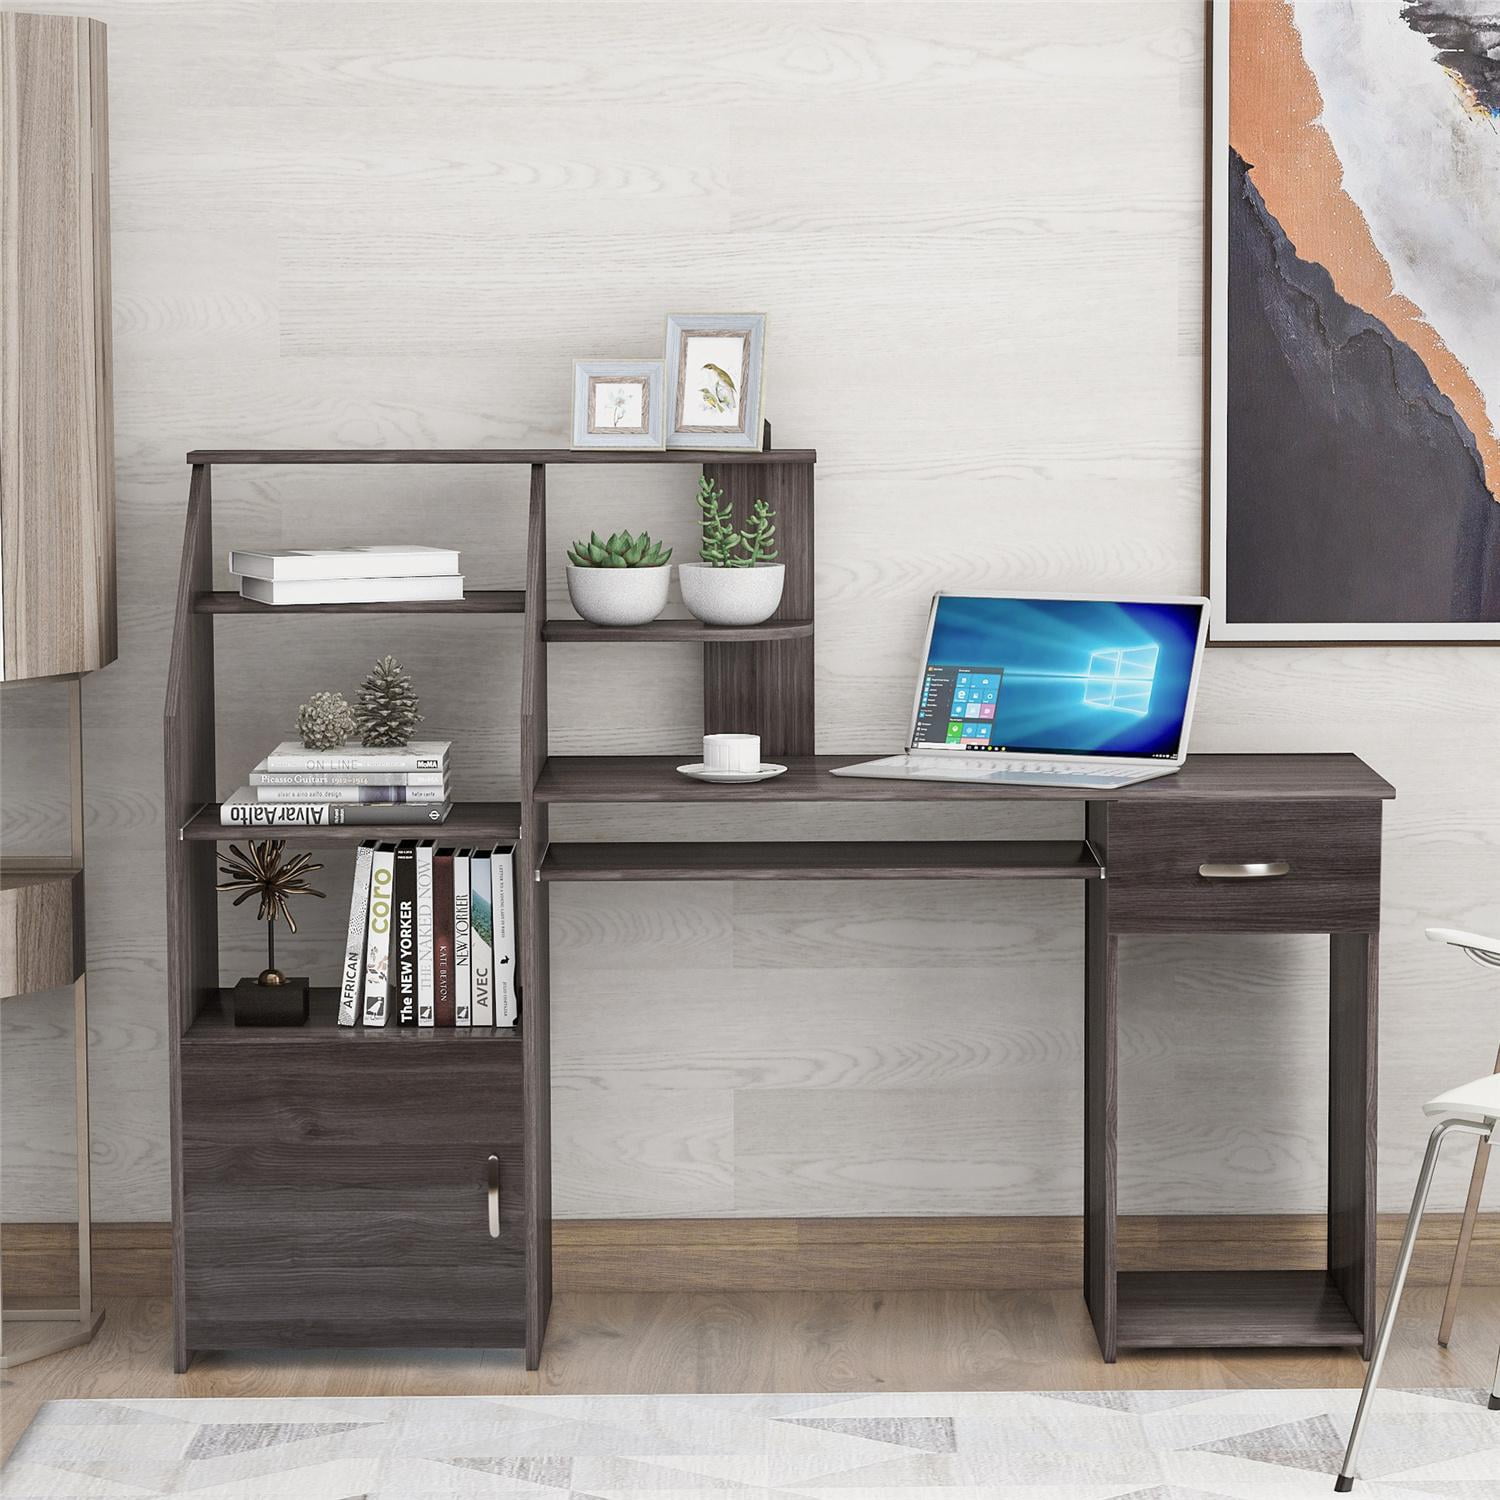 Details about   Modern Computer Table Desk Home Office Study Workstation Table w/ Shelf/Drawers 